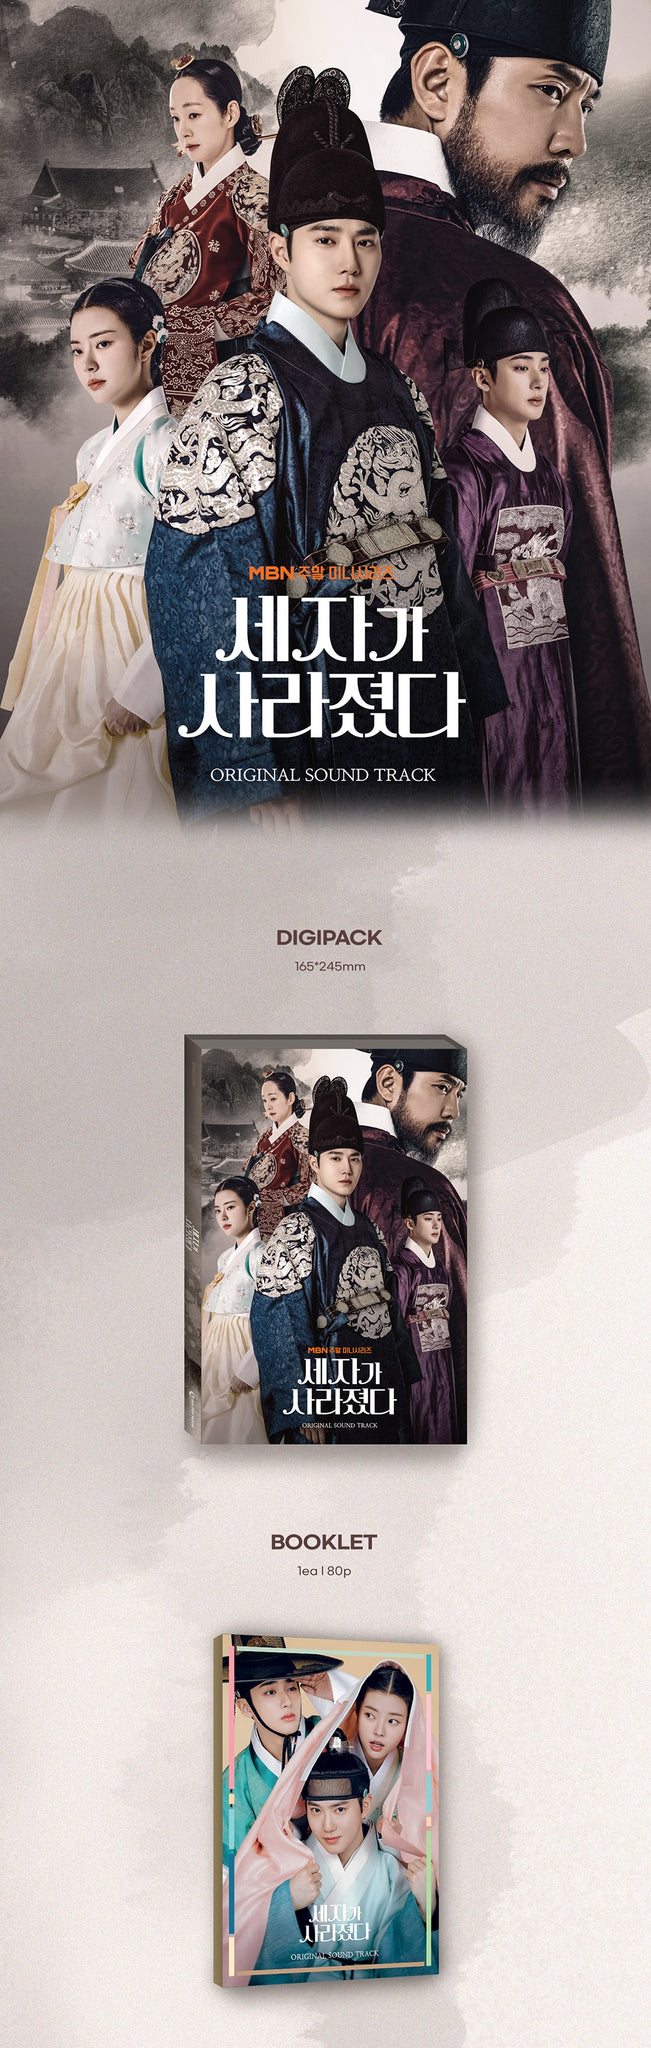 Missing Crown Prince OST Inclusions: Digipack, Booklet